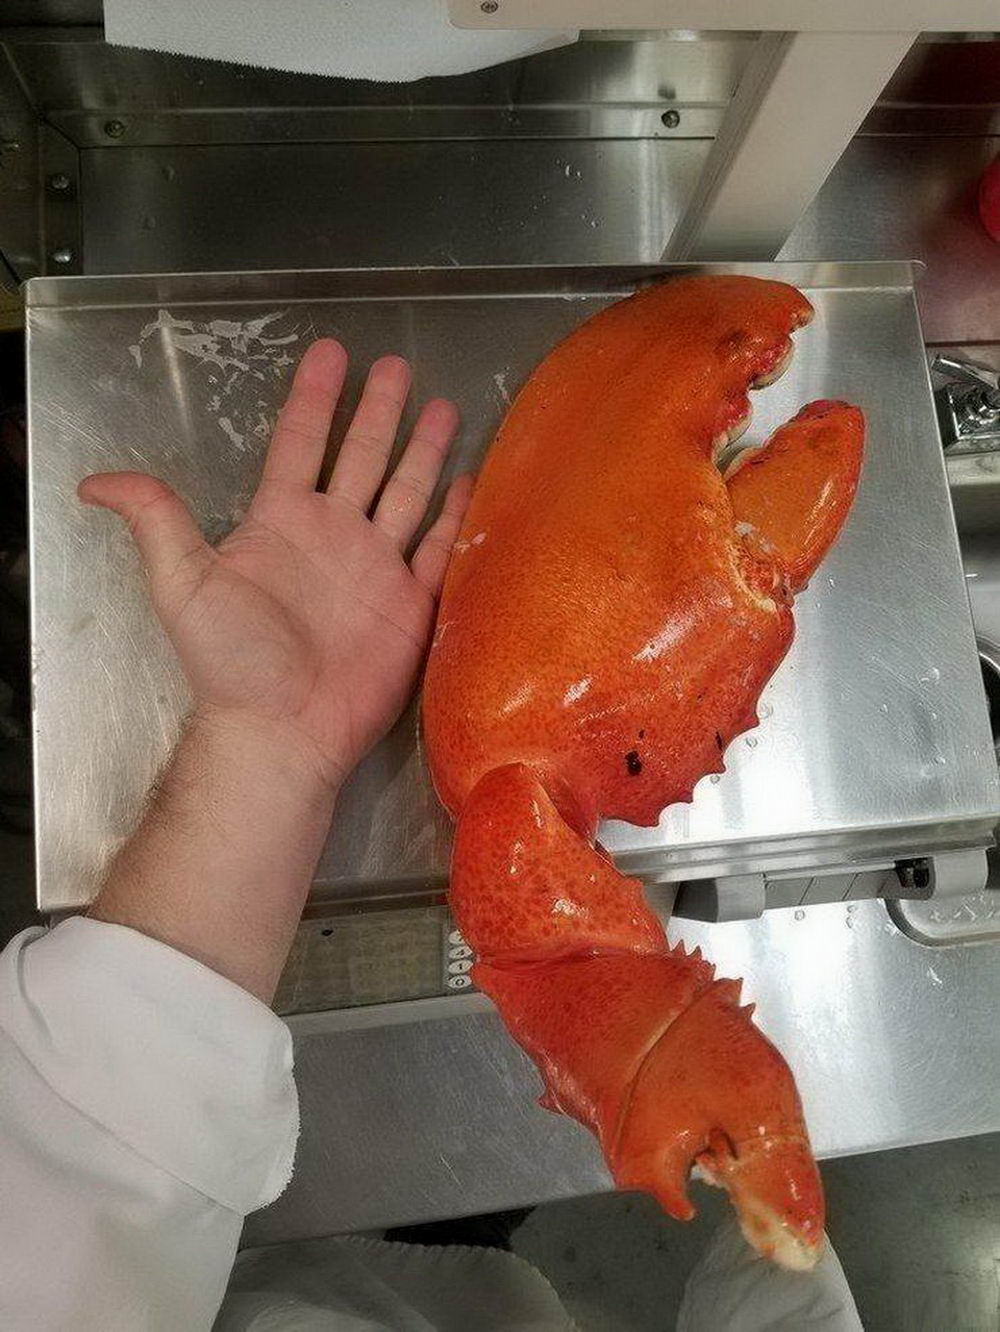 remarkable image of a person's hand next to a giant pincer